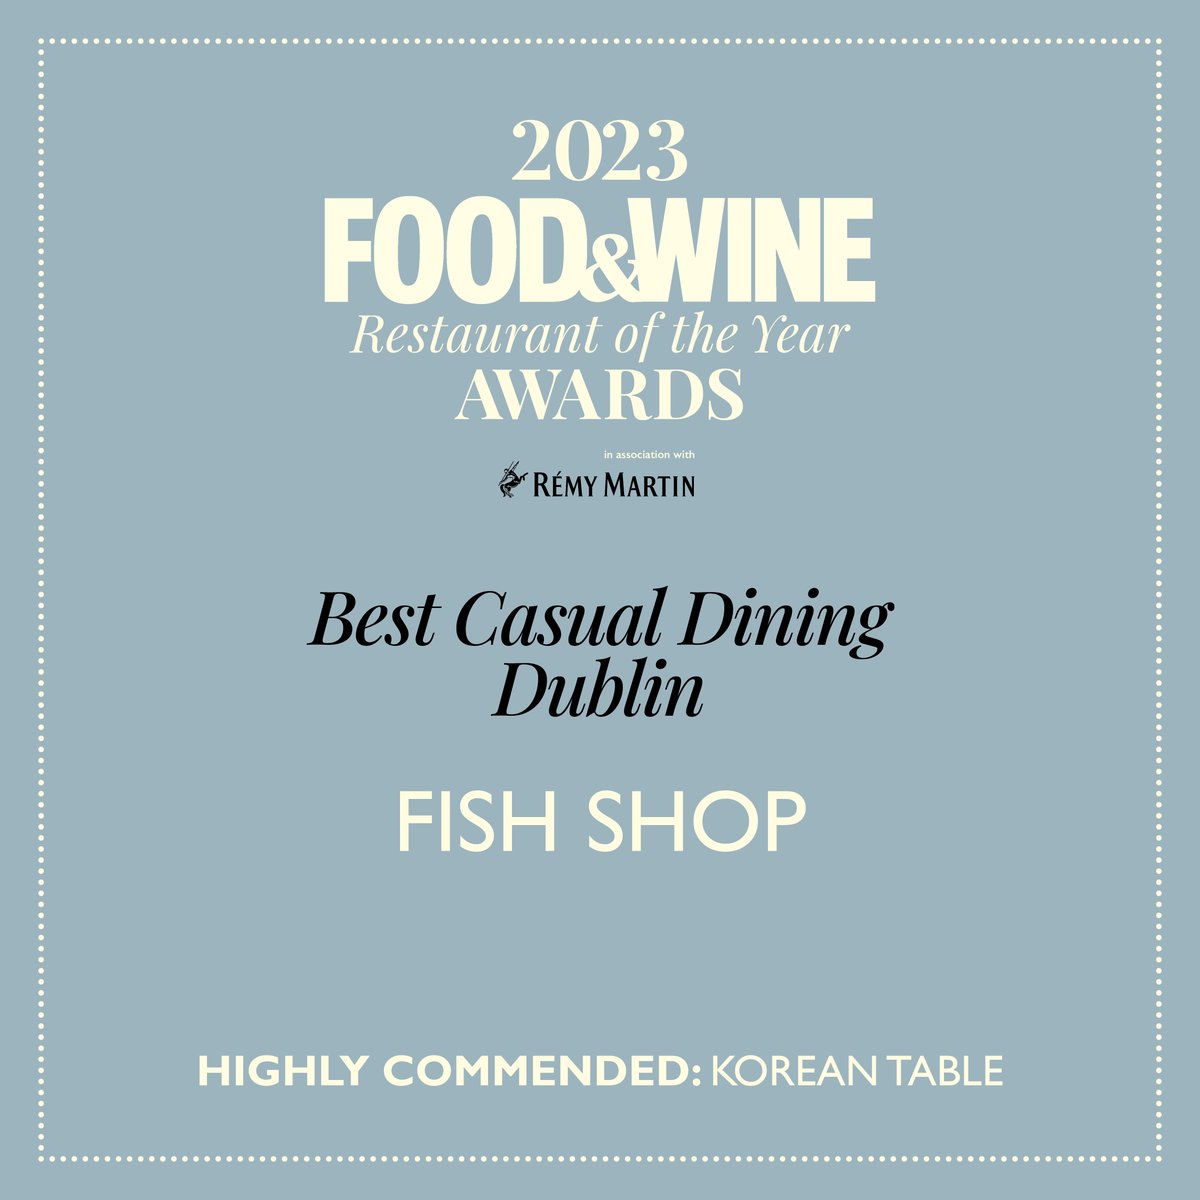 The award for Best Casual Dining Dublin goes to @FishShopDublin, with Korean Table highly commended #ROTYA2023 @RemyMartinUK @barryandfitz @liberty_wines @TomkinsIP @RoundRoomDublin